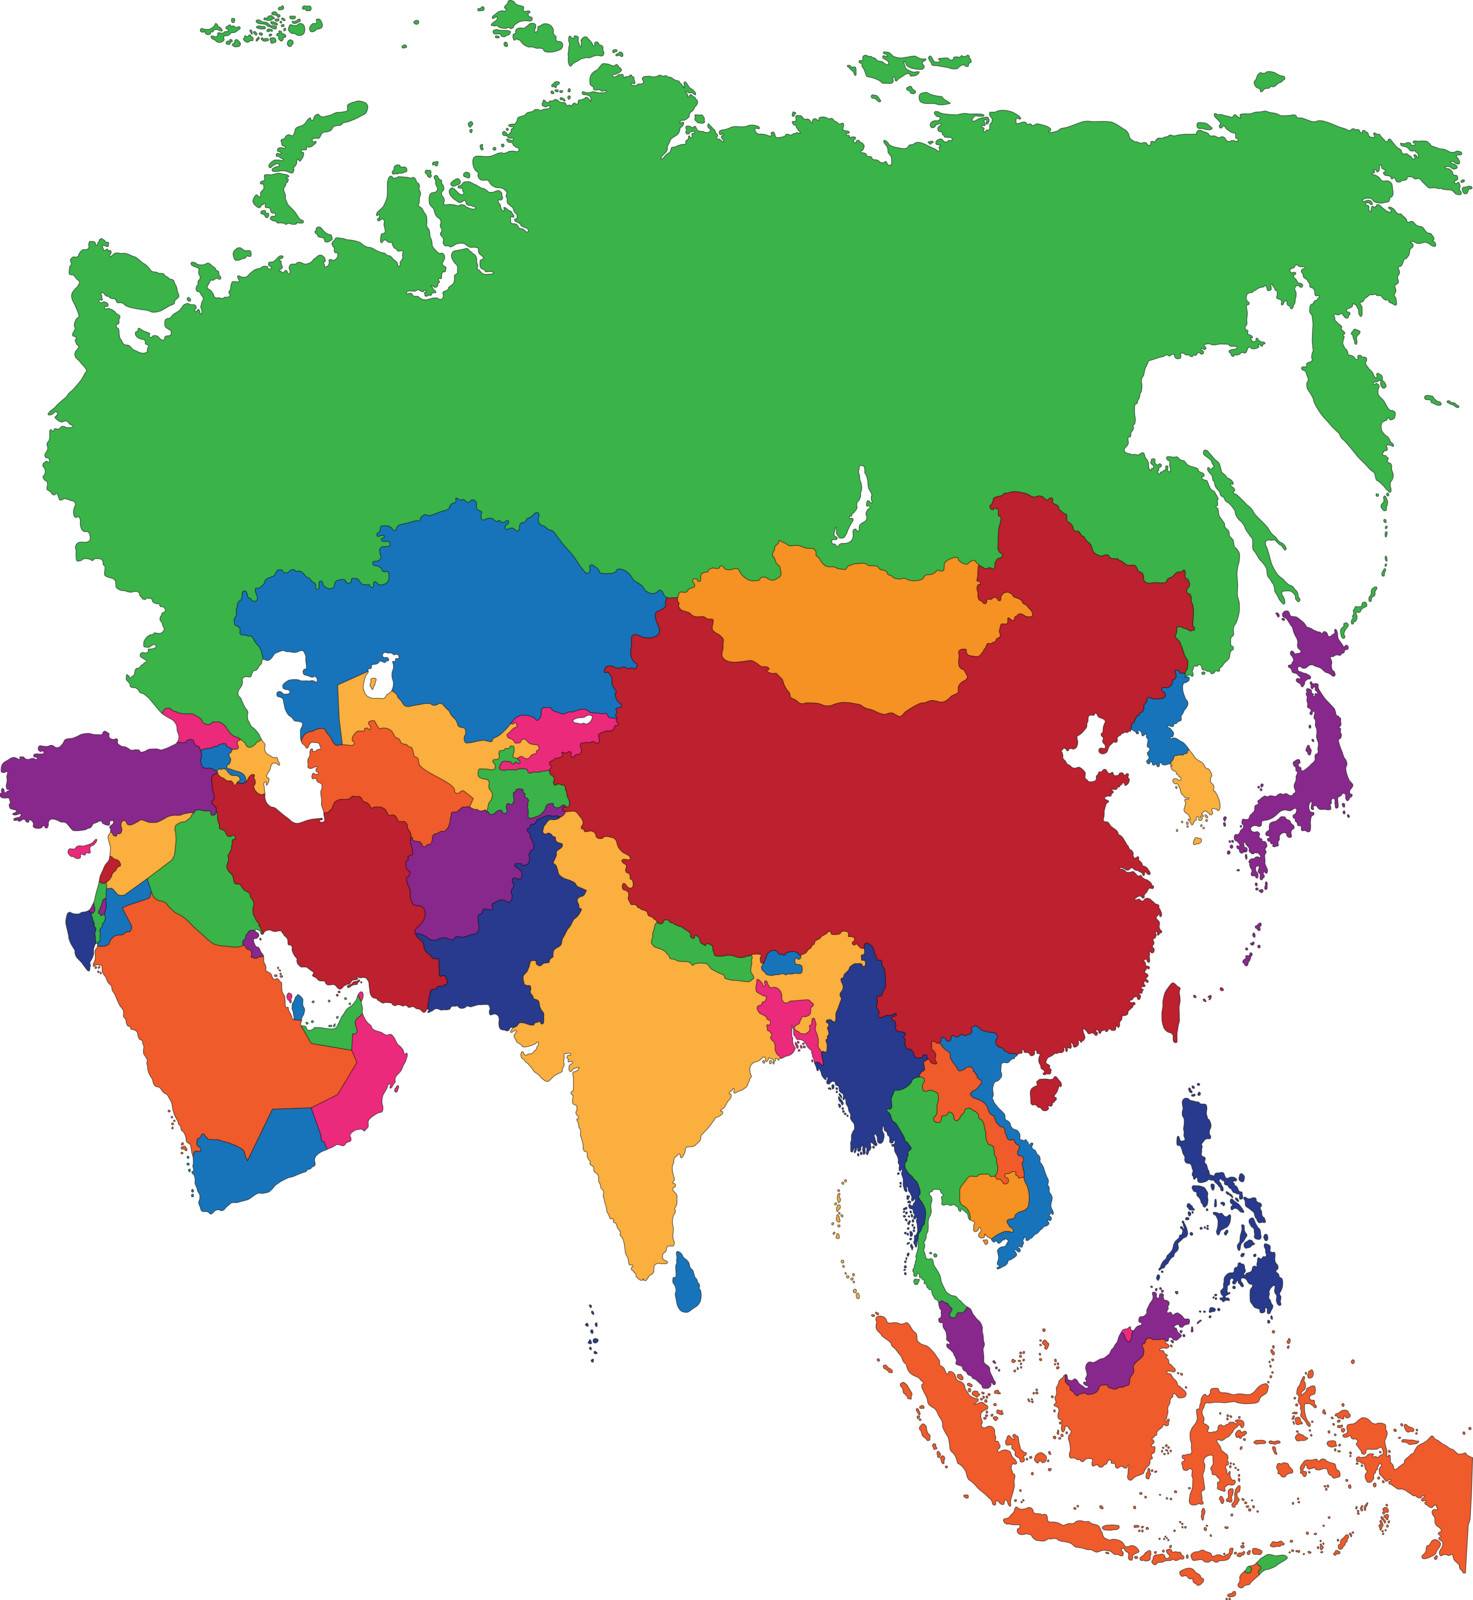 Colorful Asia map with countries and capital cities